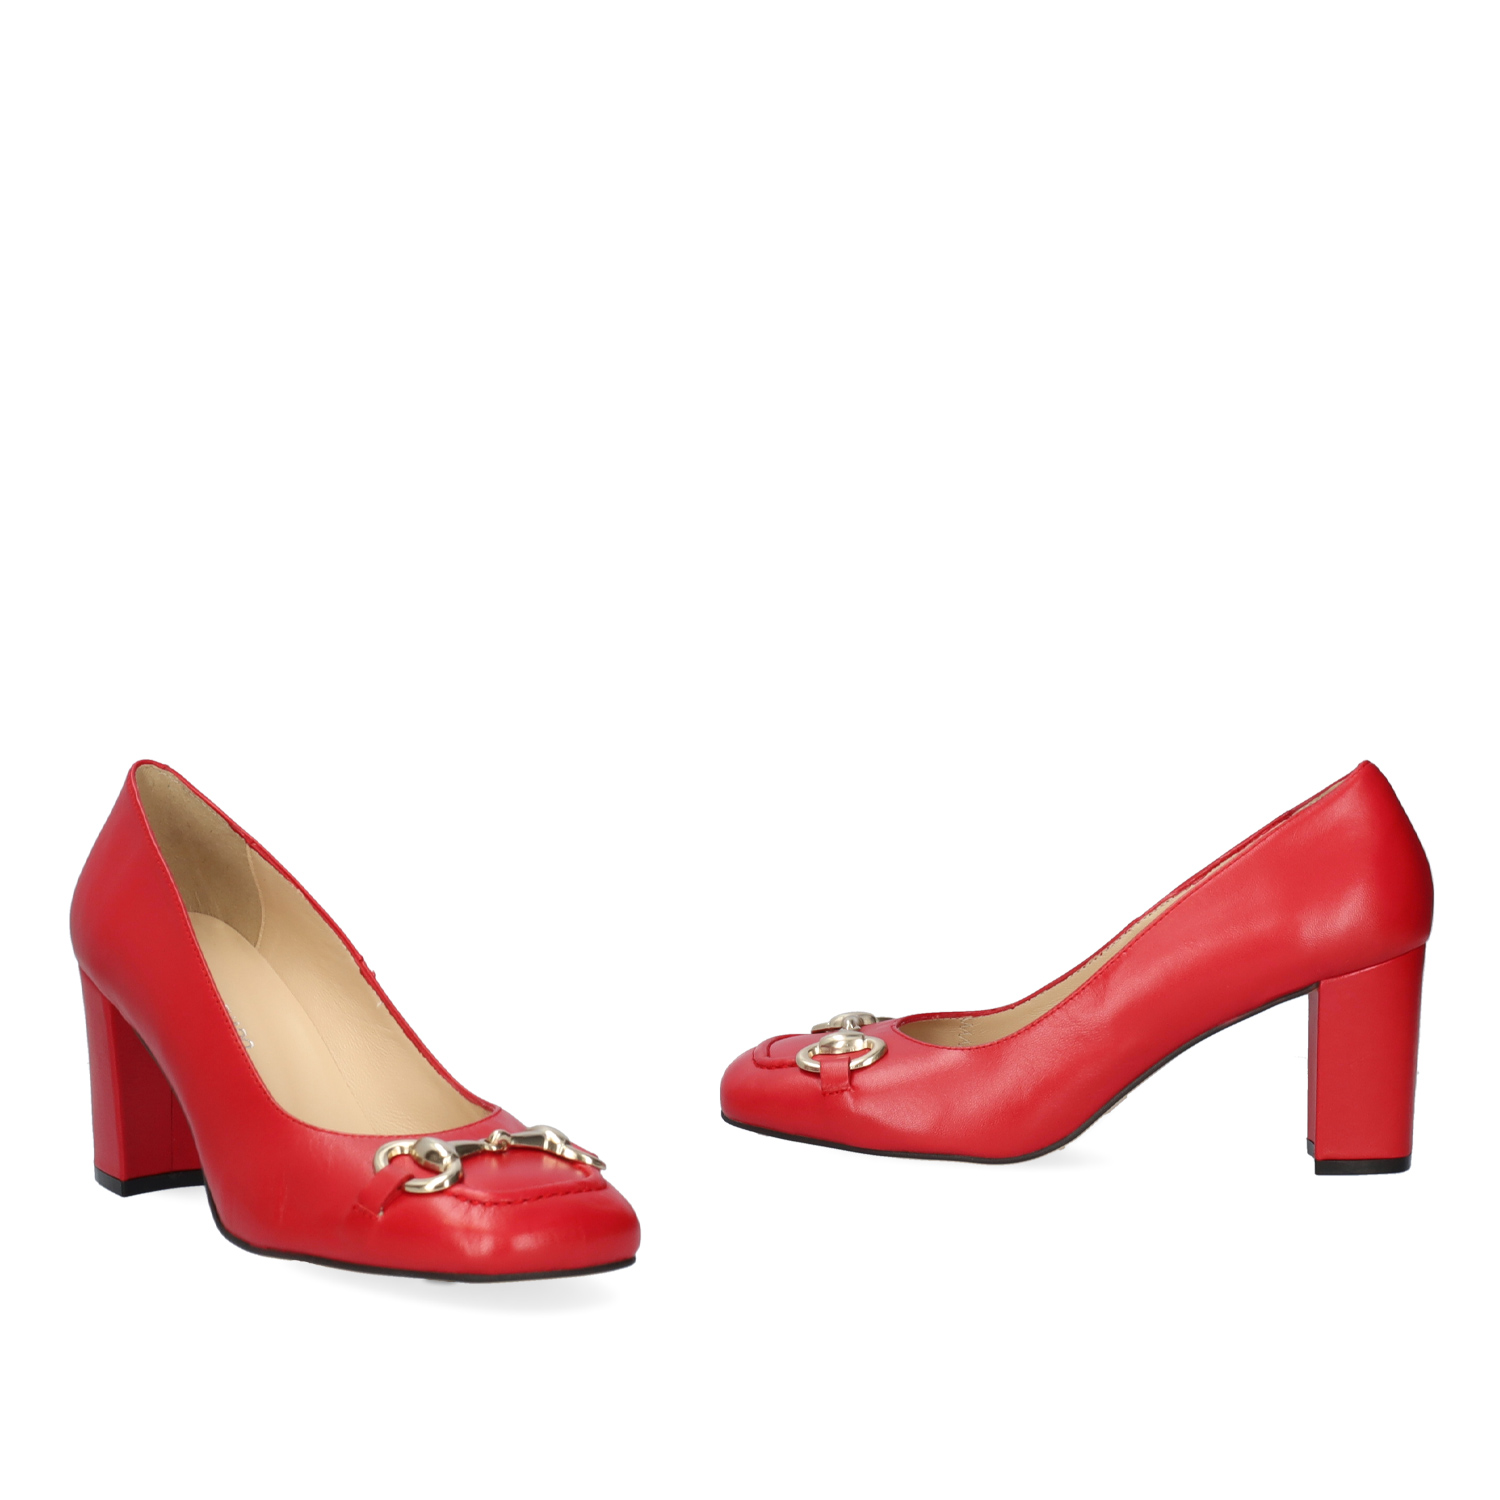 Vintage style heeled shoes in red leather 